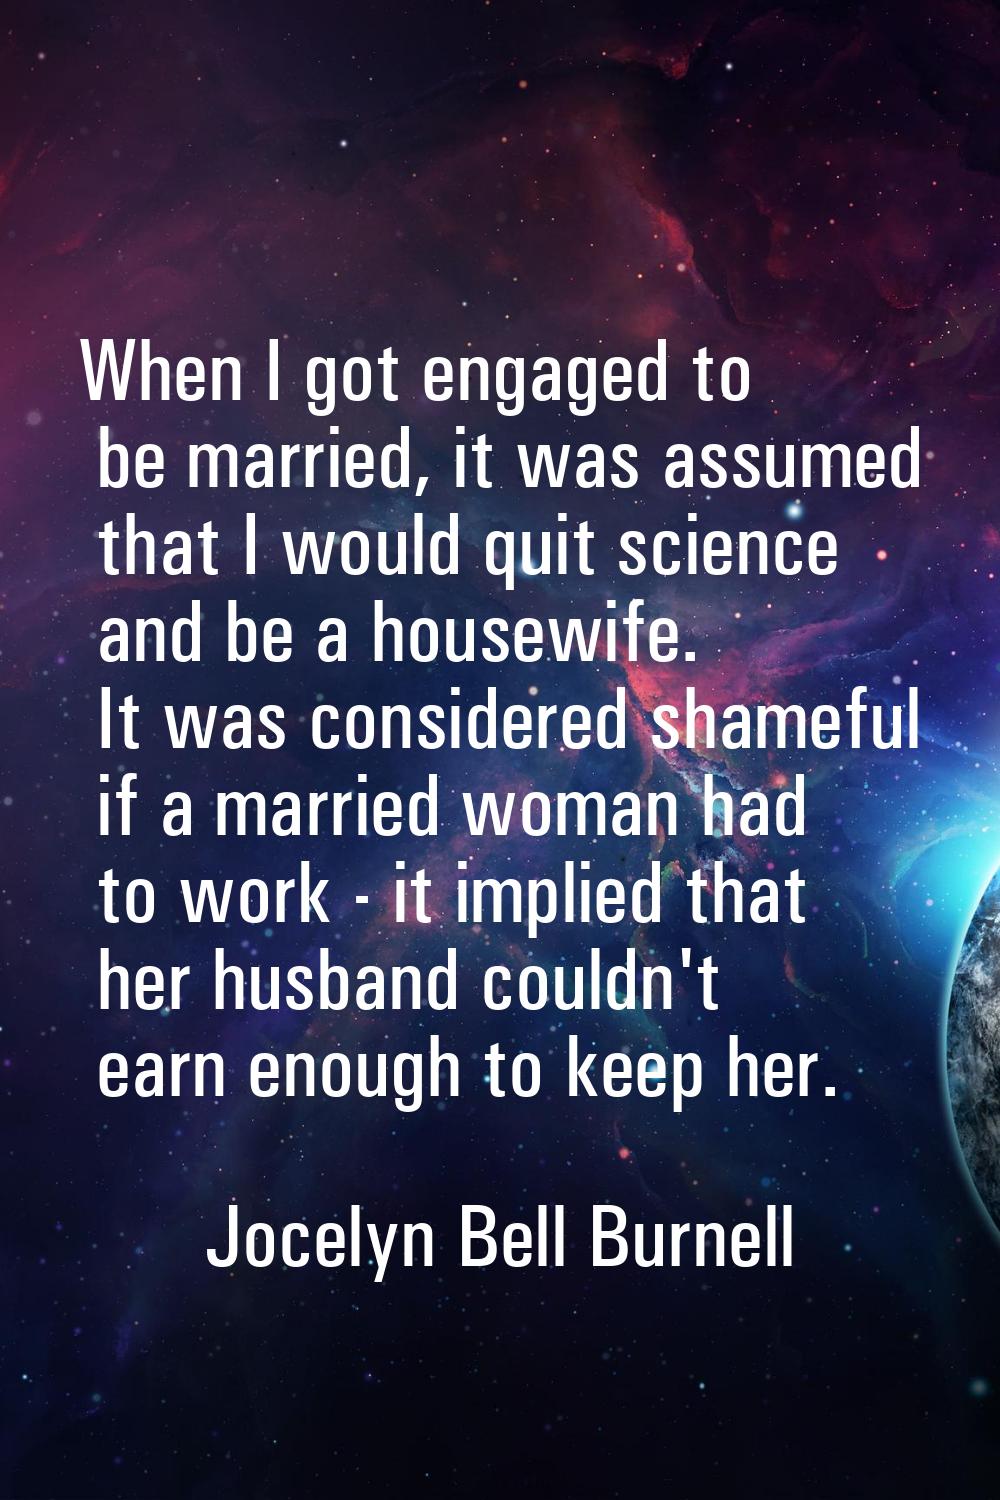 When I got engaged to be married, it was assumed that I would quit science and be a housewife. It w